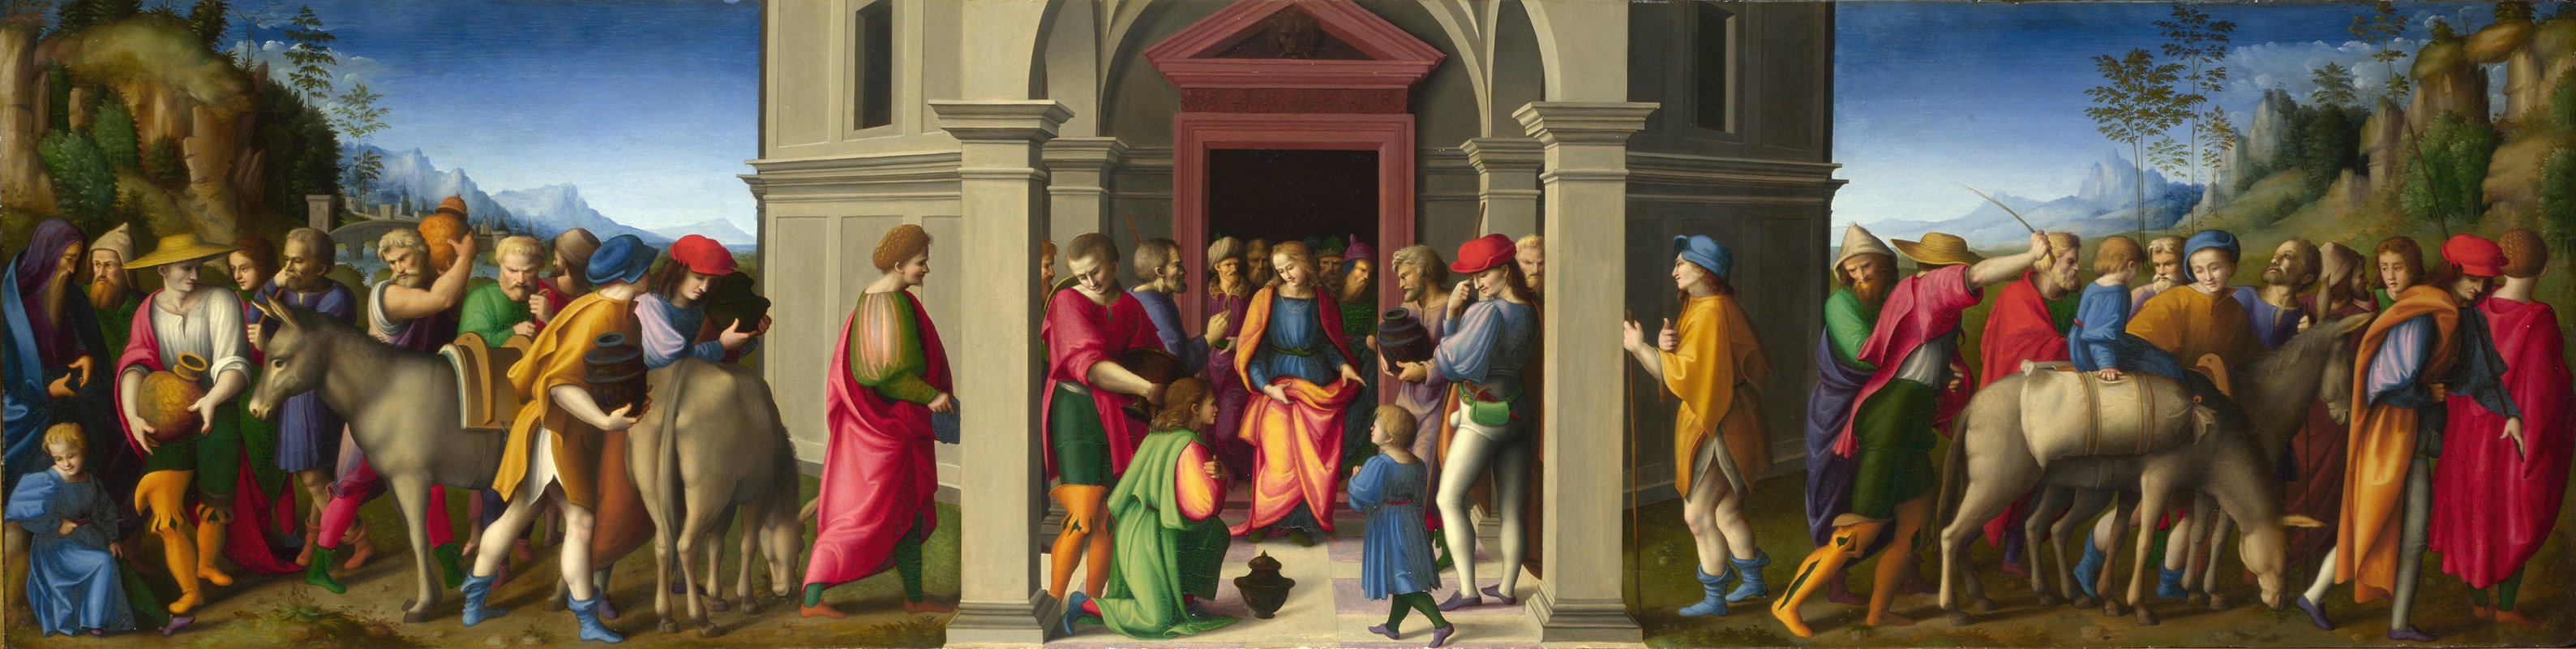 Bacchiacca - Joseph receives his Brothers on their Second Visit to Egypt